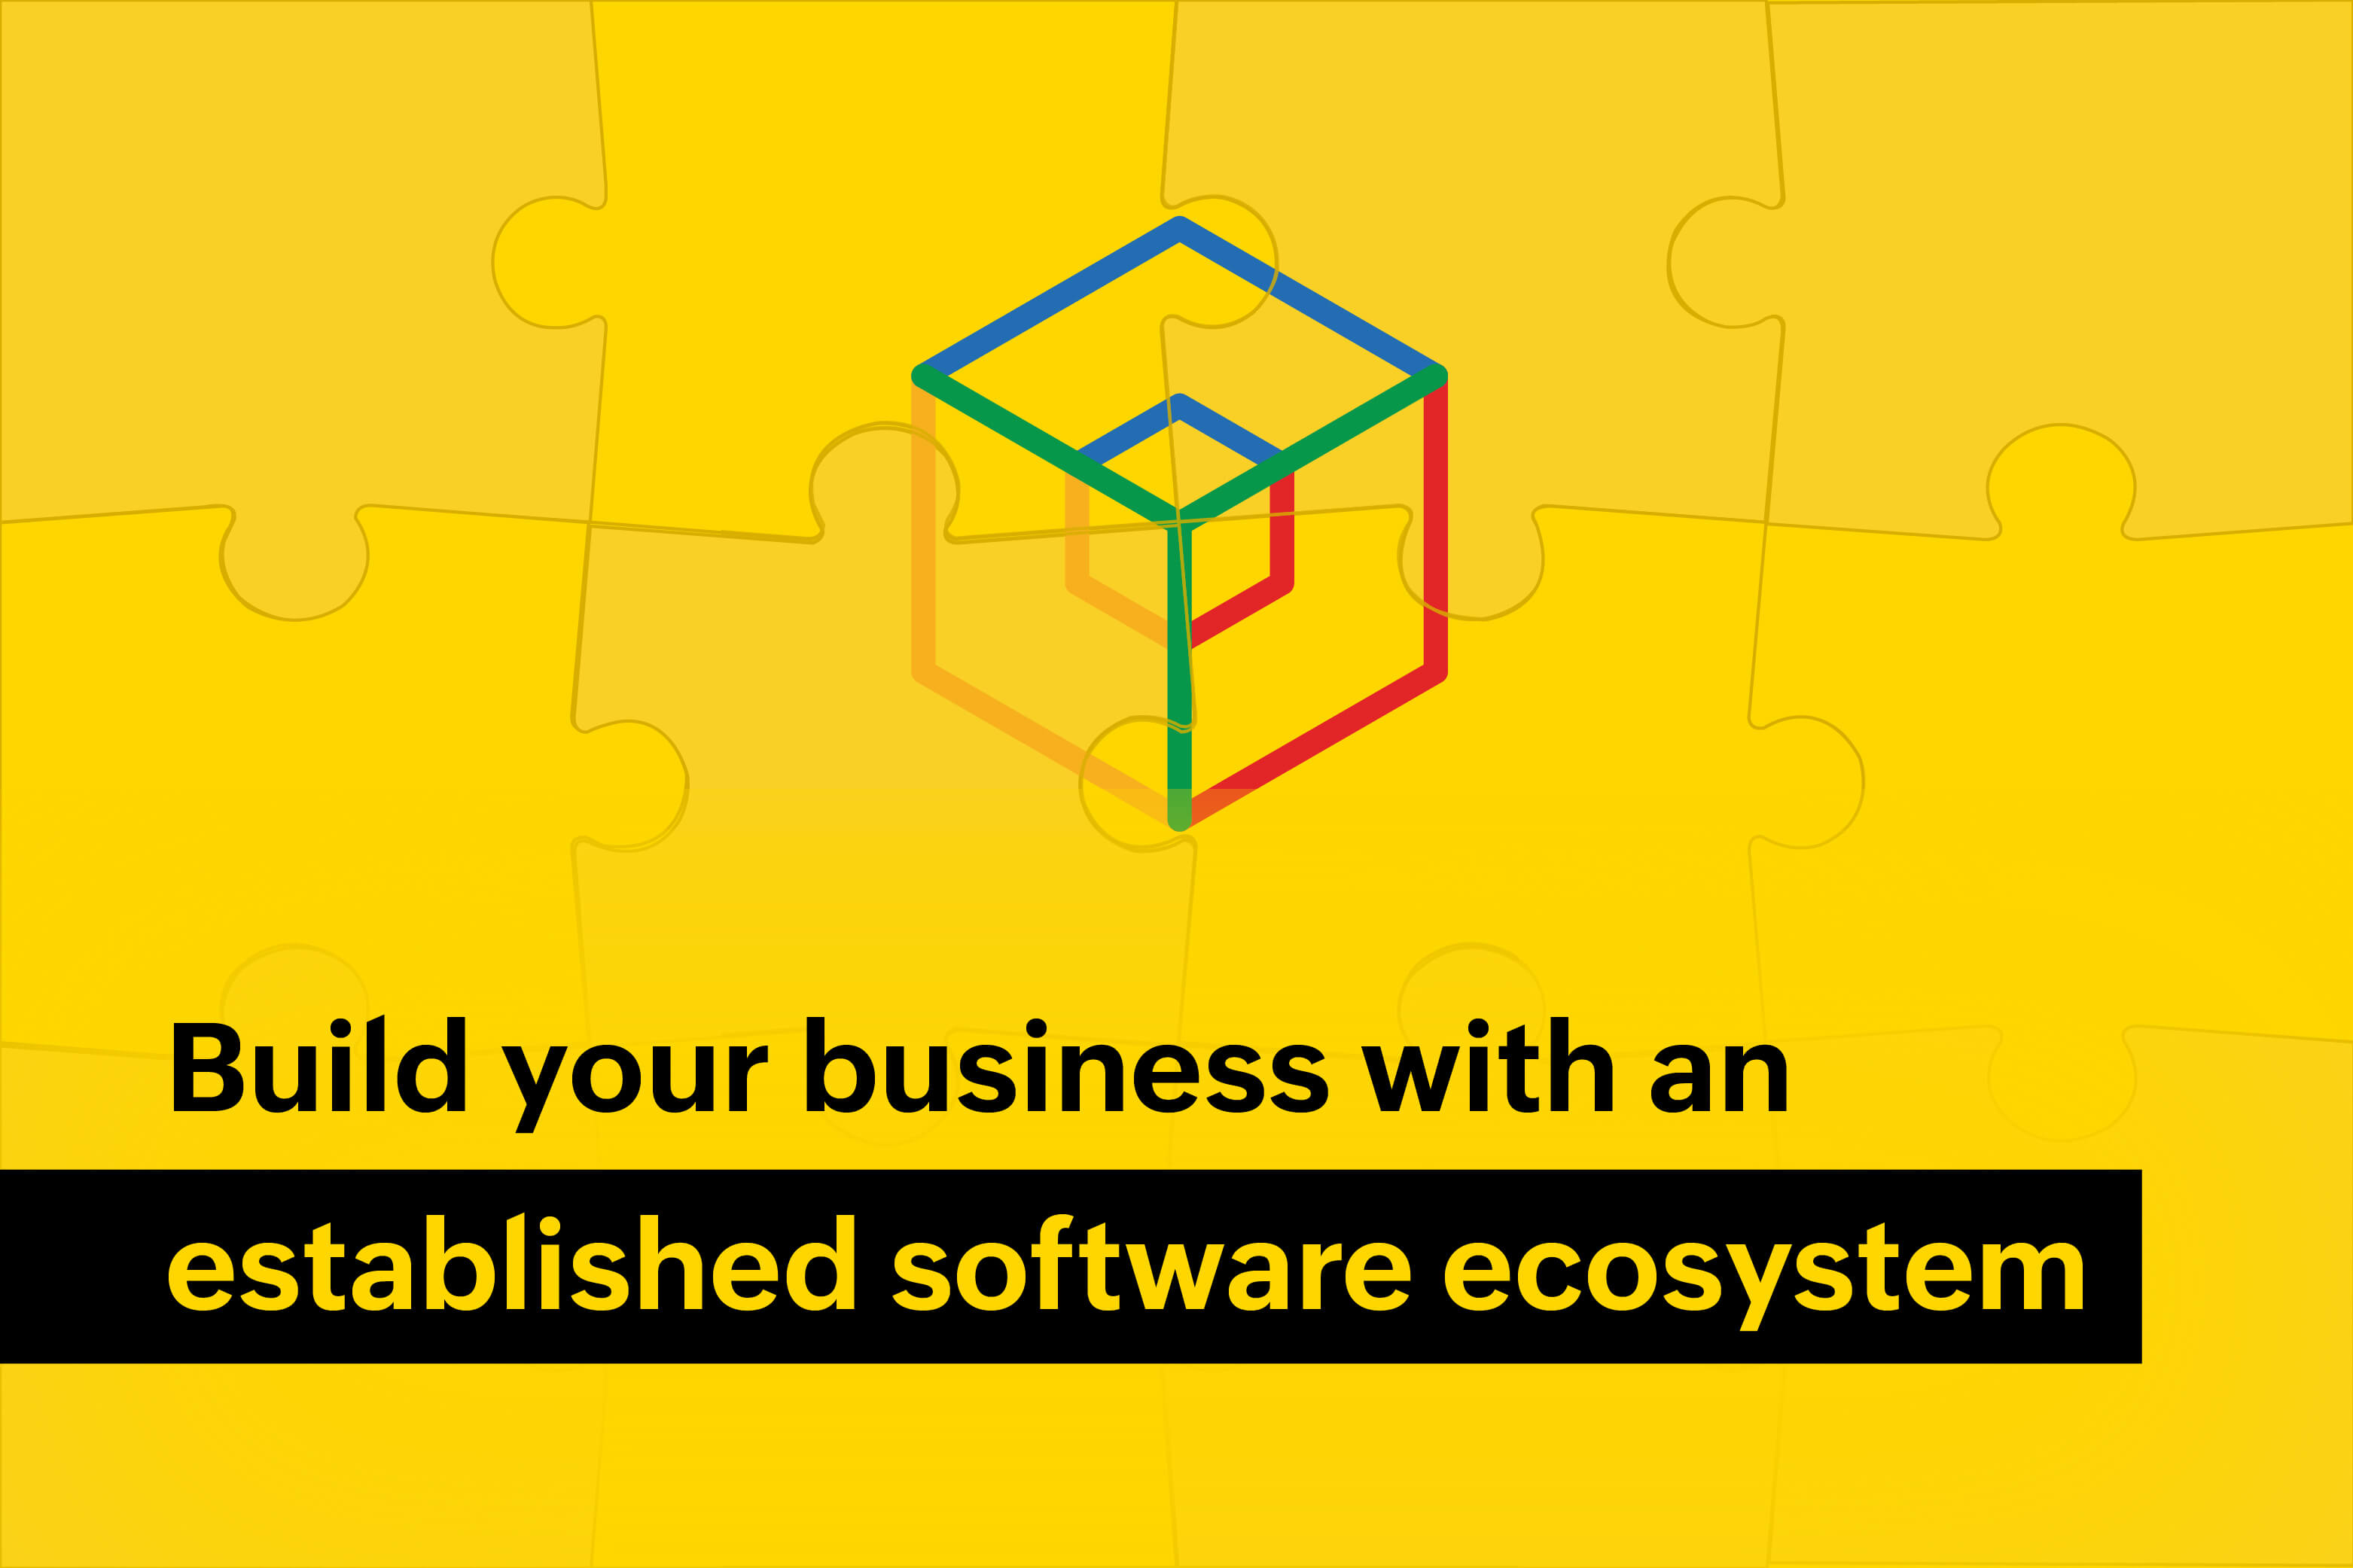 Build your business with an established ecosystem